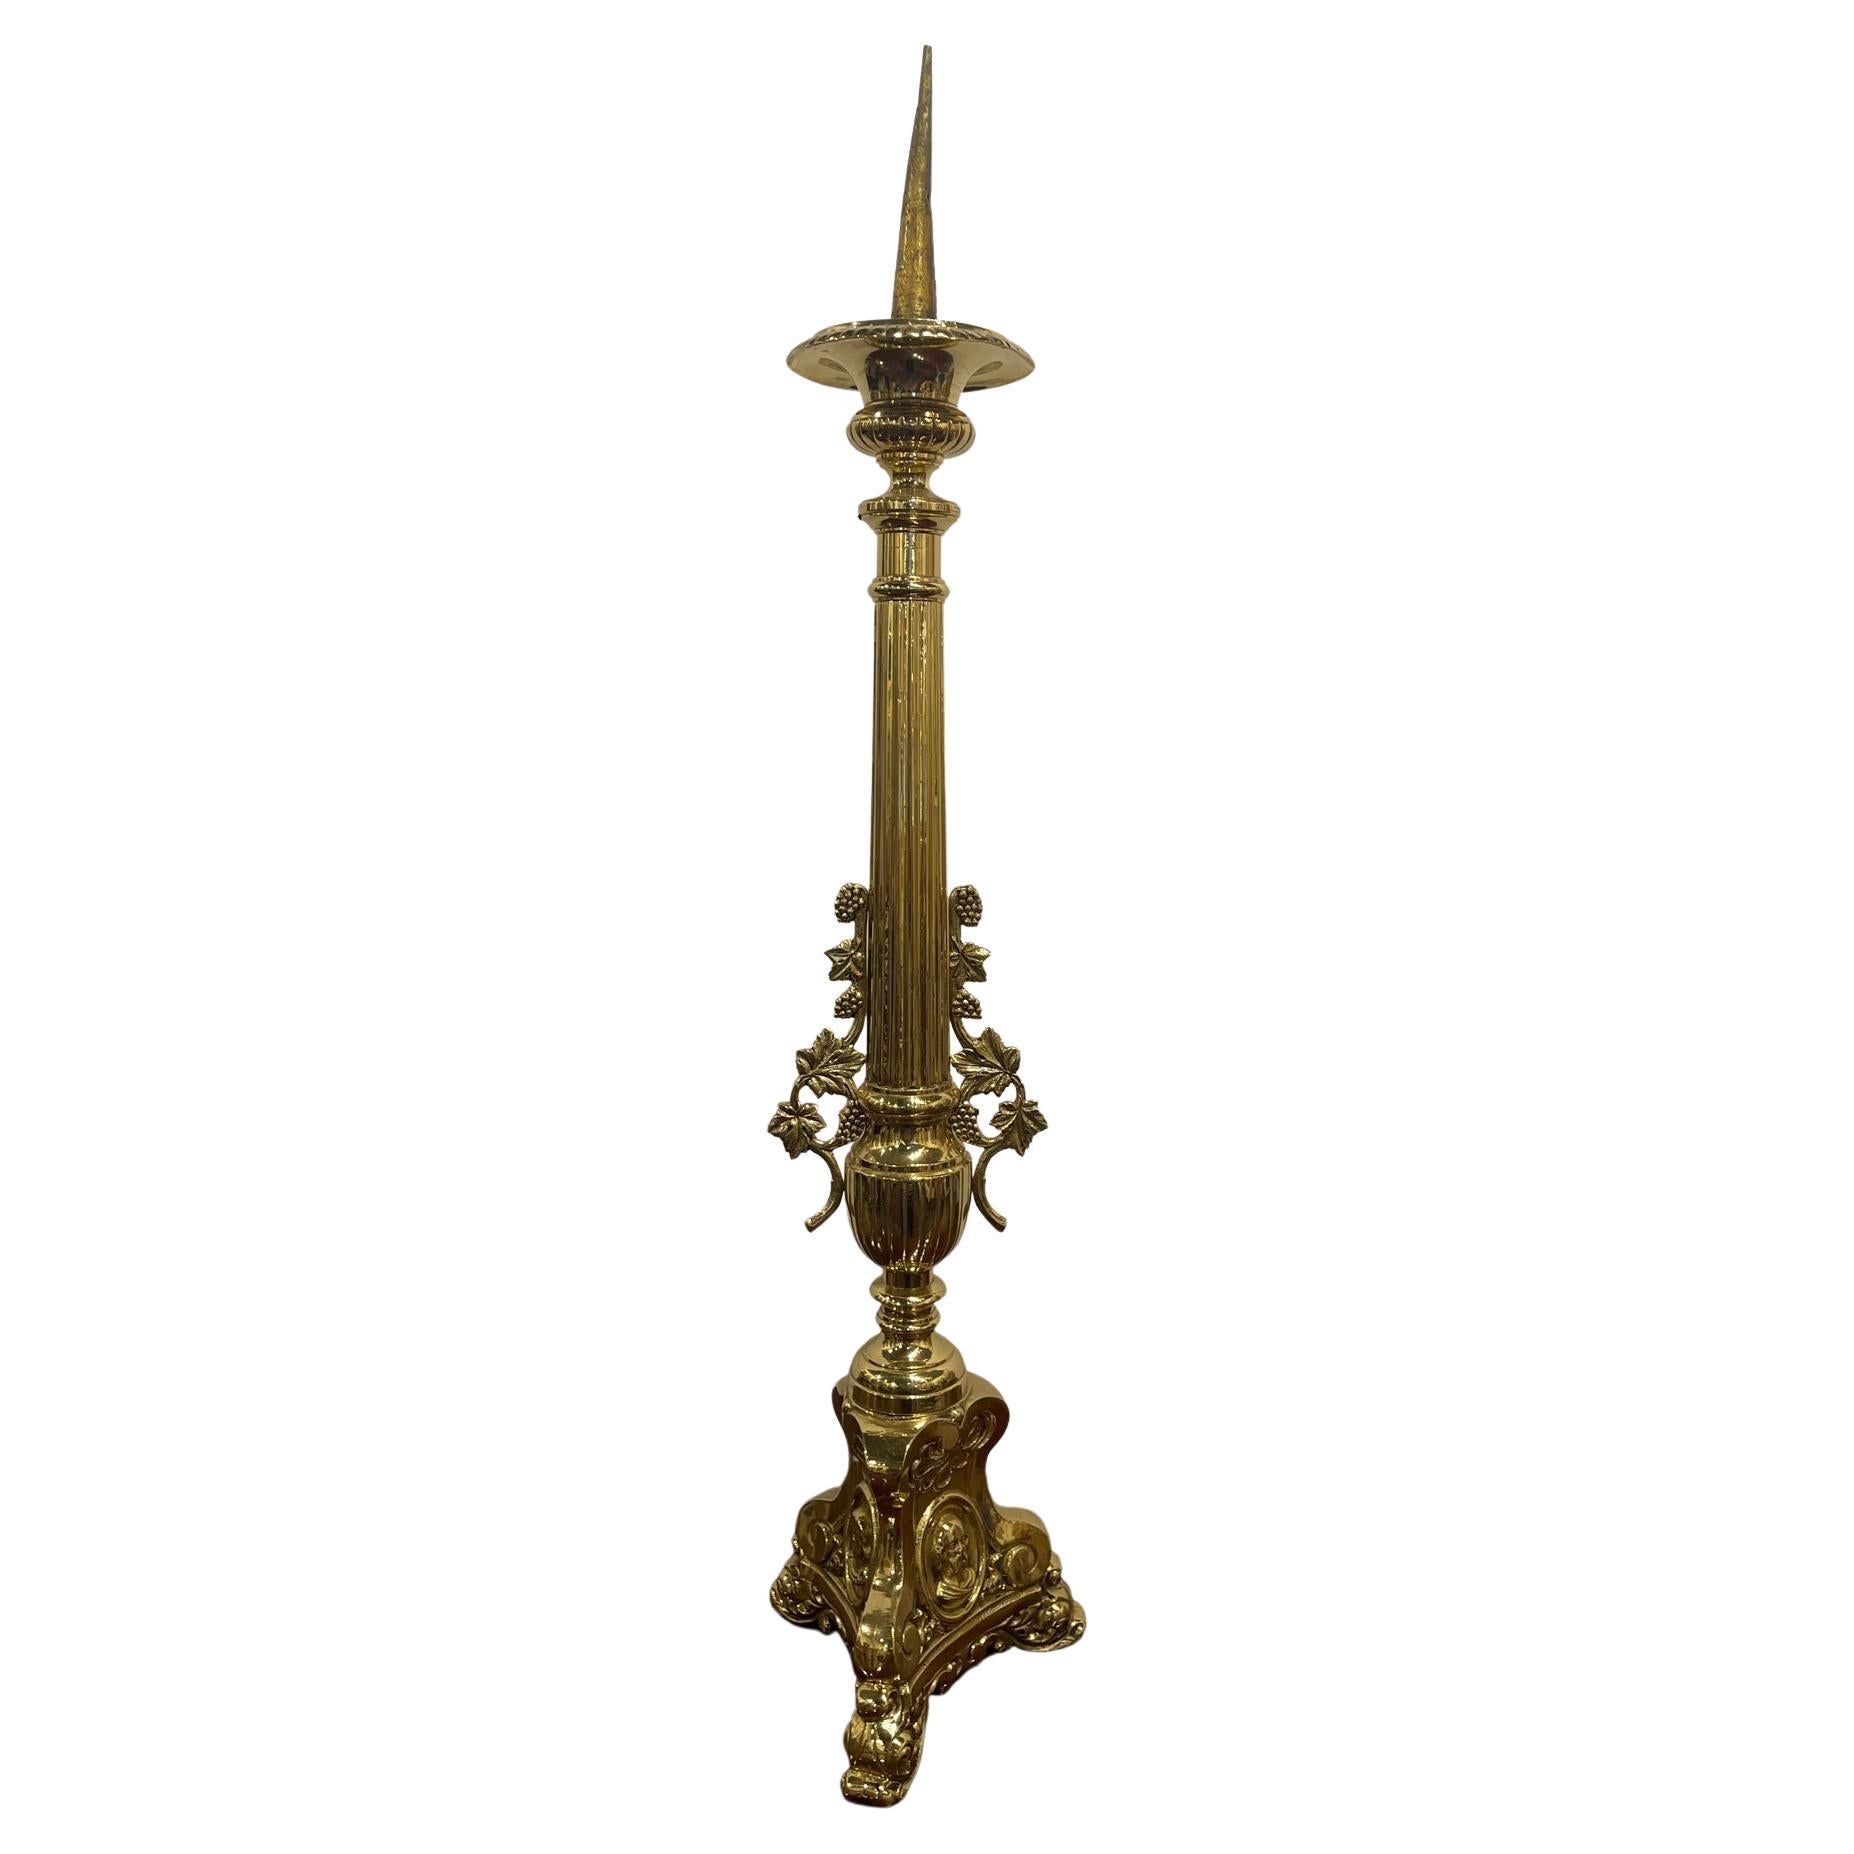 French Polished Brass Decorative Pricket or Candlestick, 19th Century